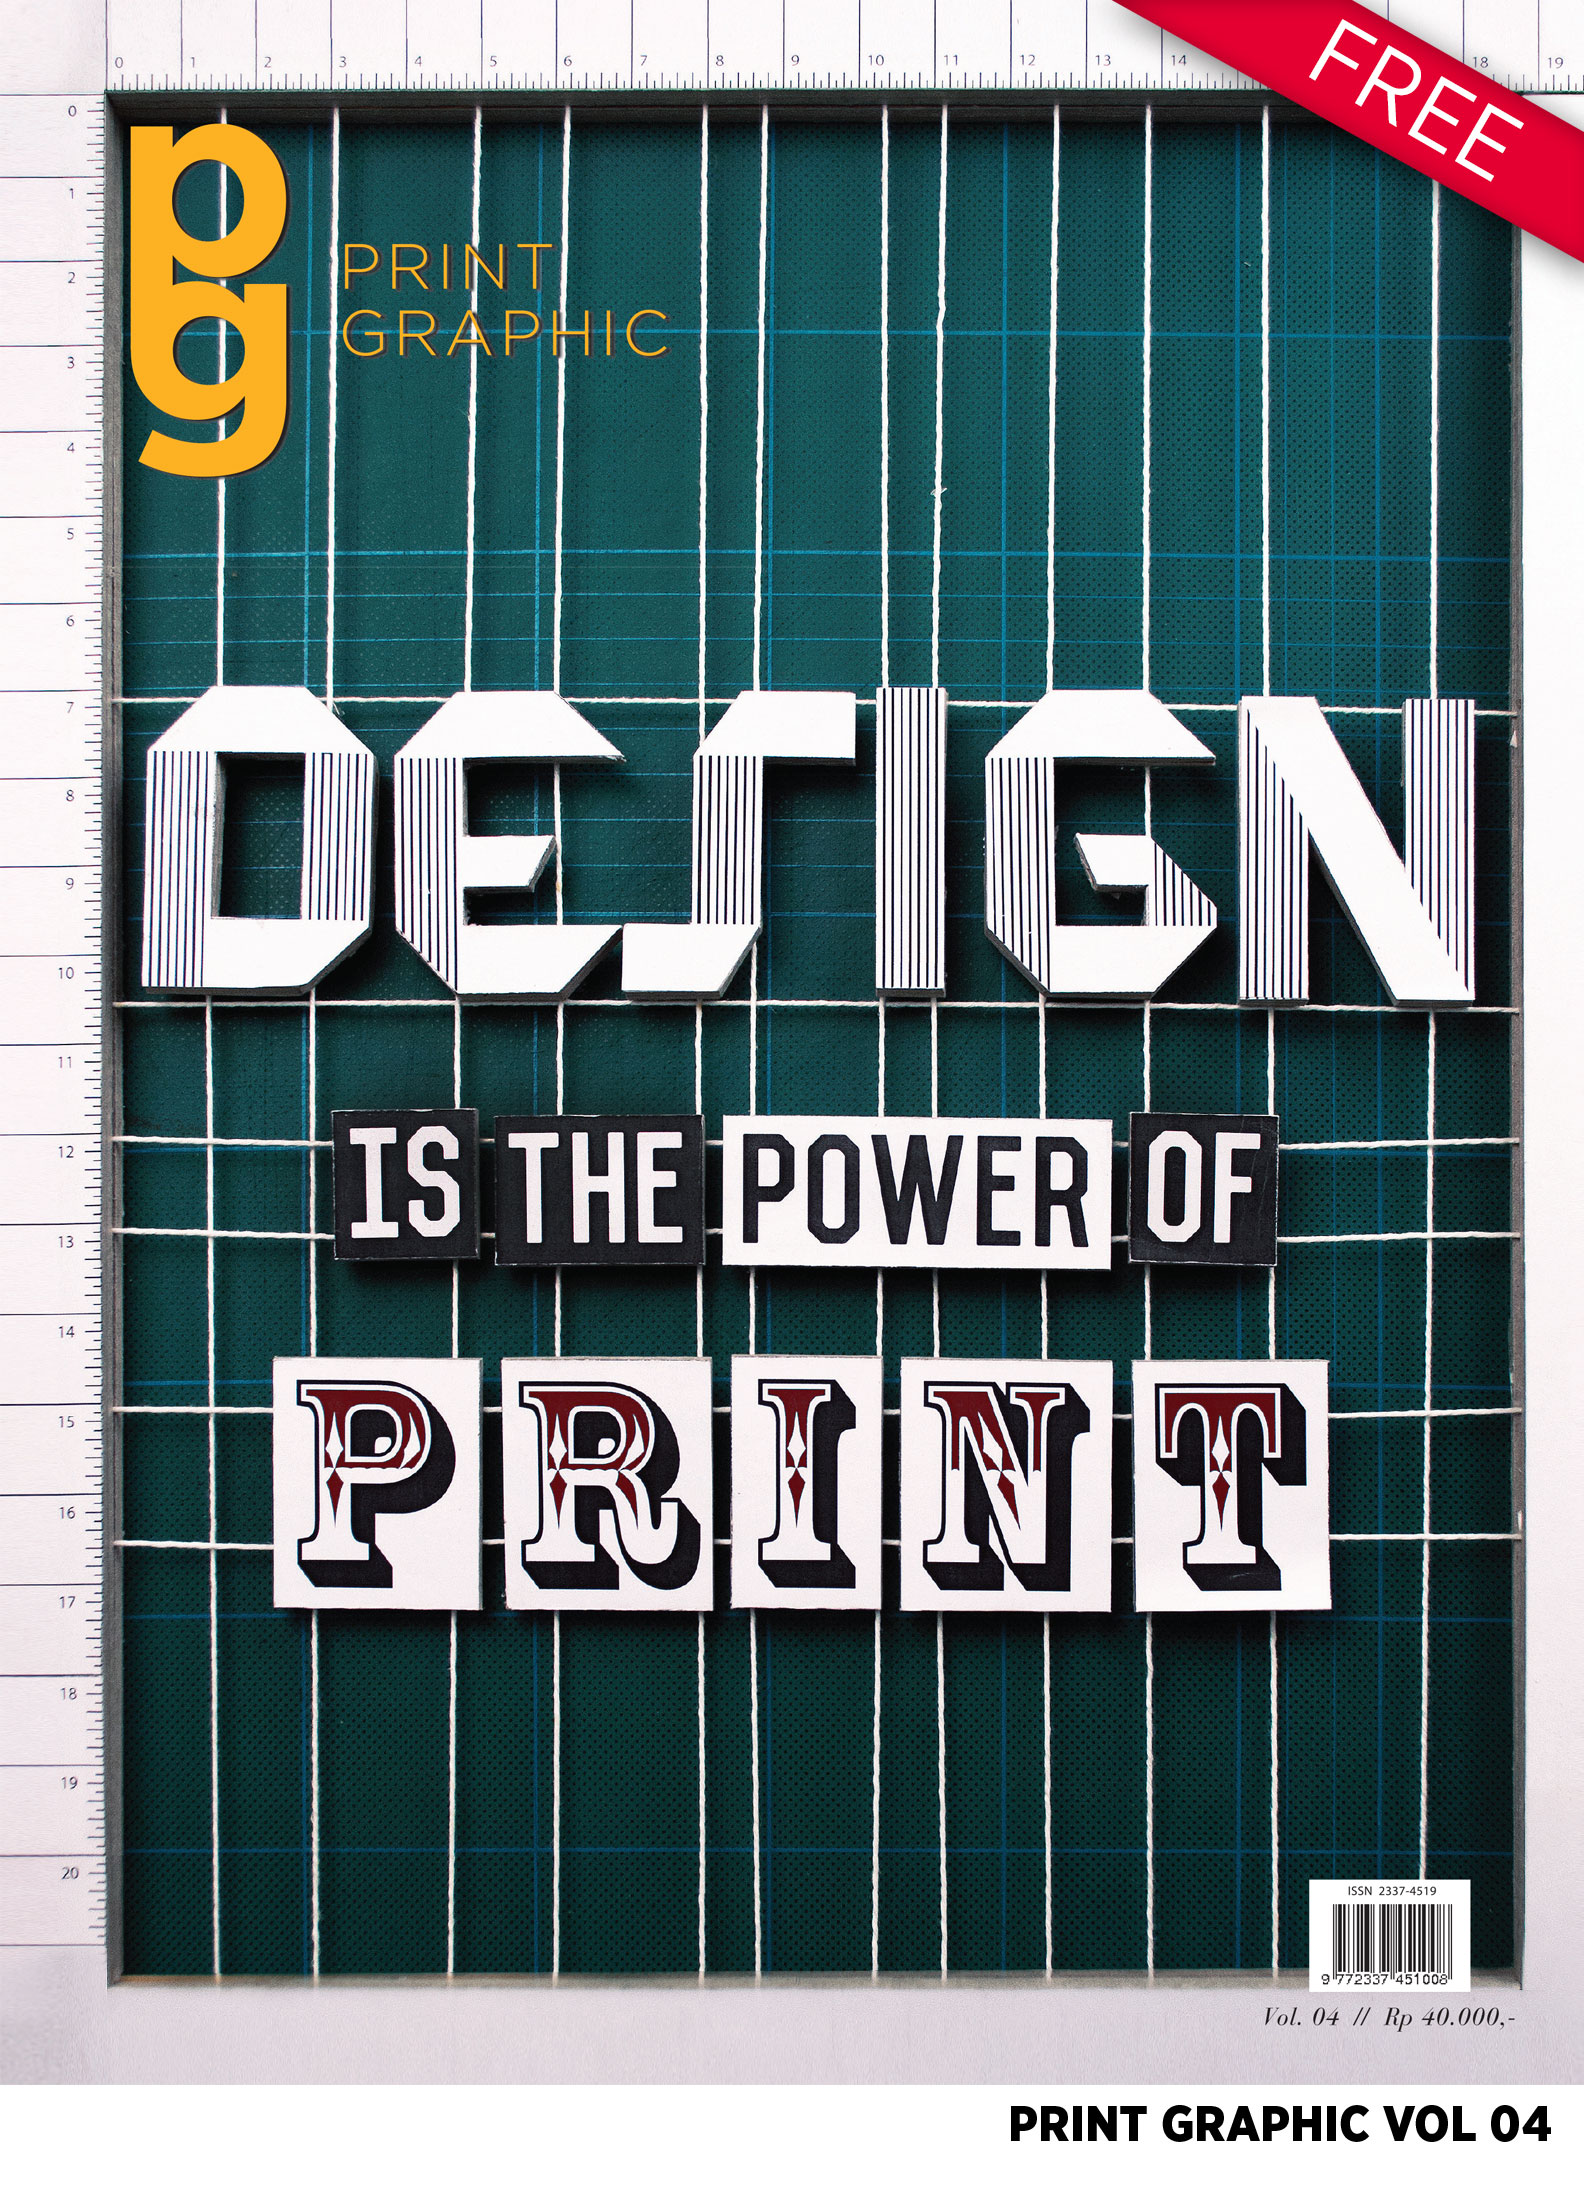 Design Is The Power of Print